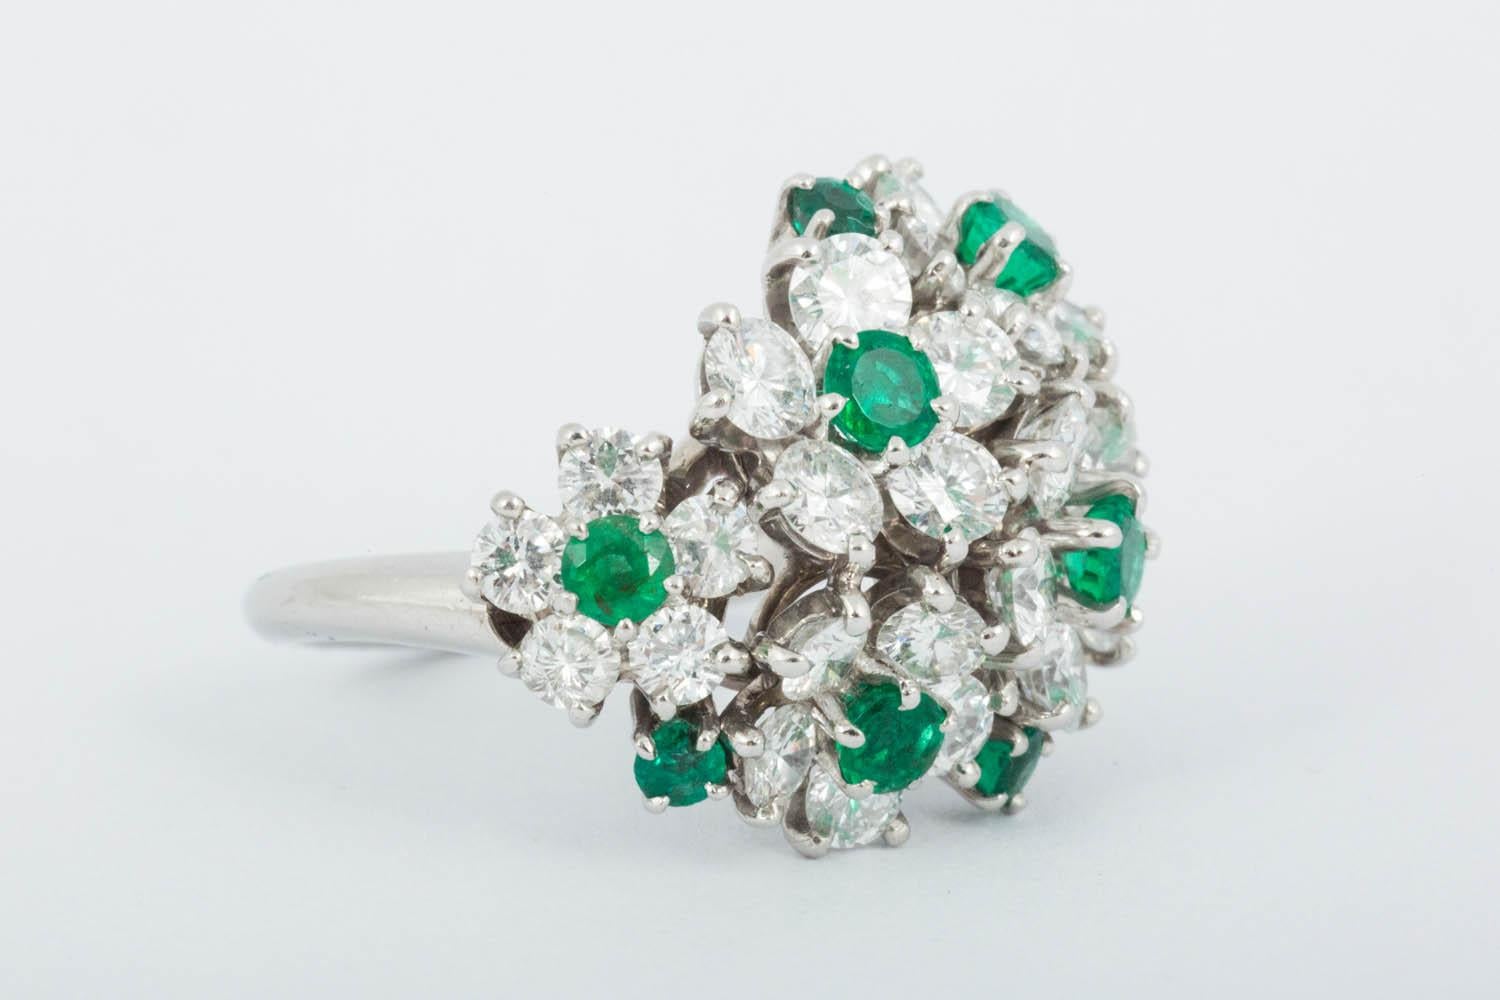 Finely cut Natural emerald and Diamond flower ring set in Platinum Circa 1960
Finger size M